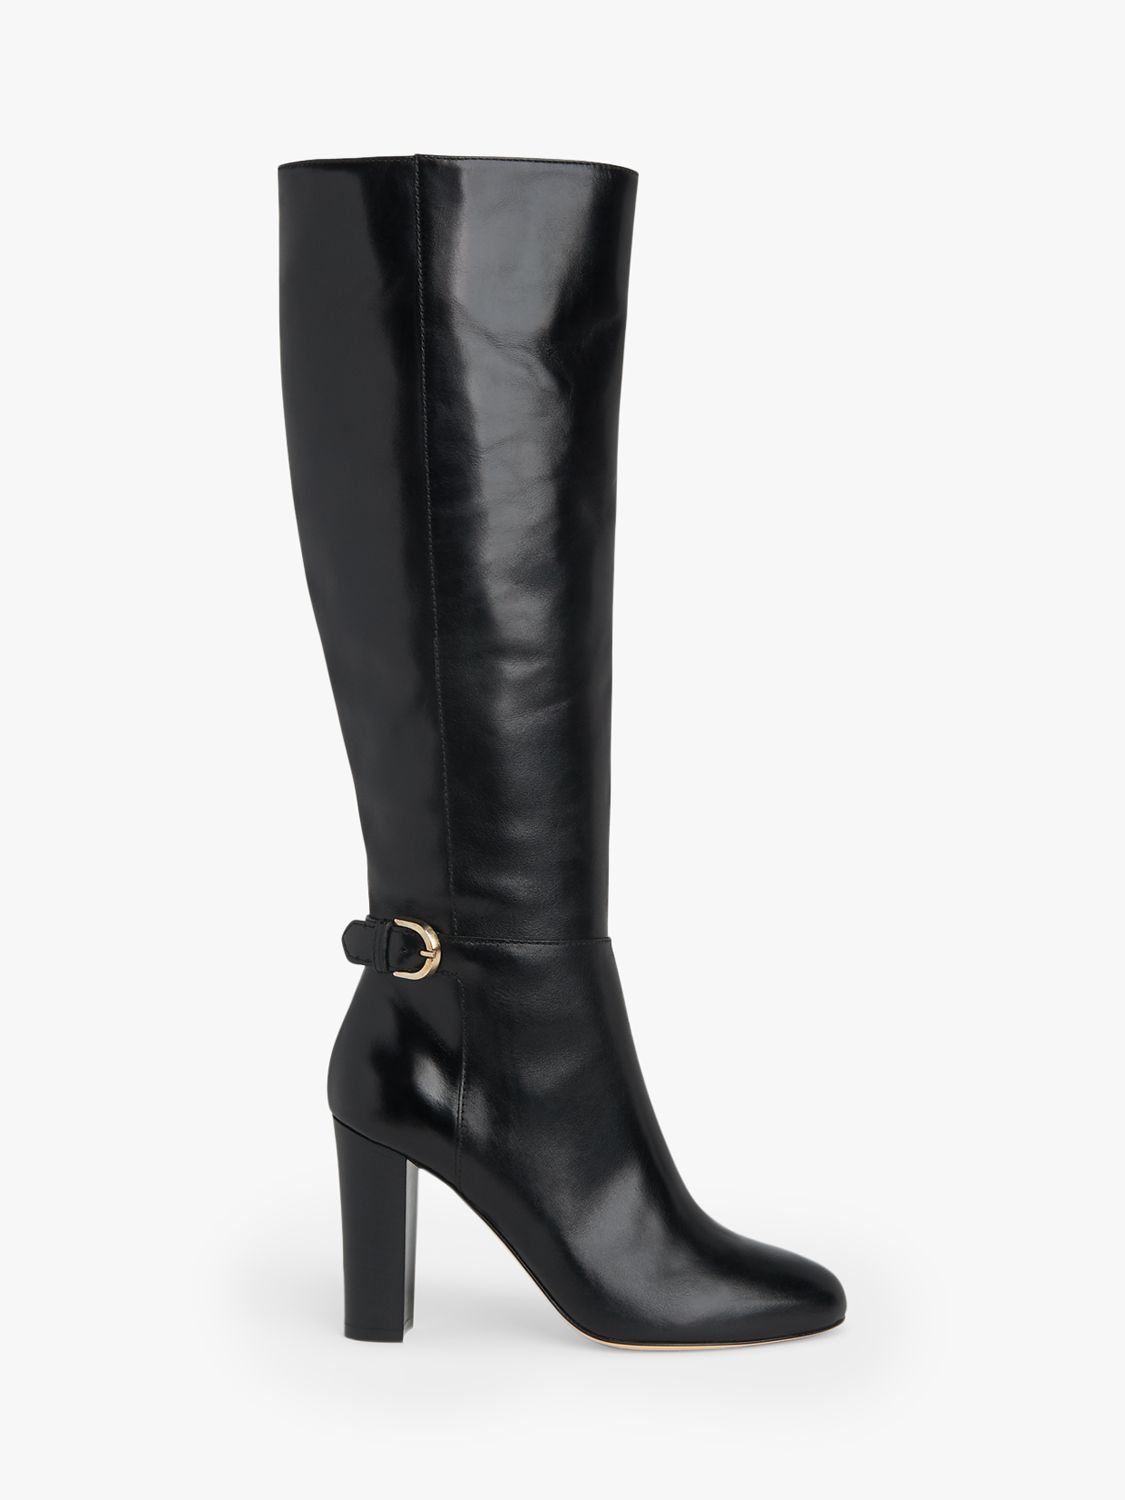 L.K.Bennett Brooklyn Leather Knee High Boots at John Lewis & Partners